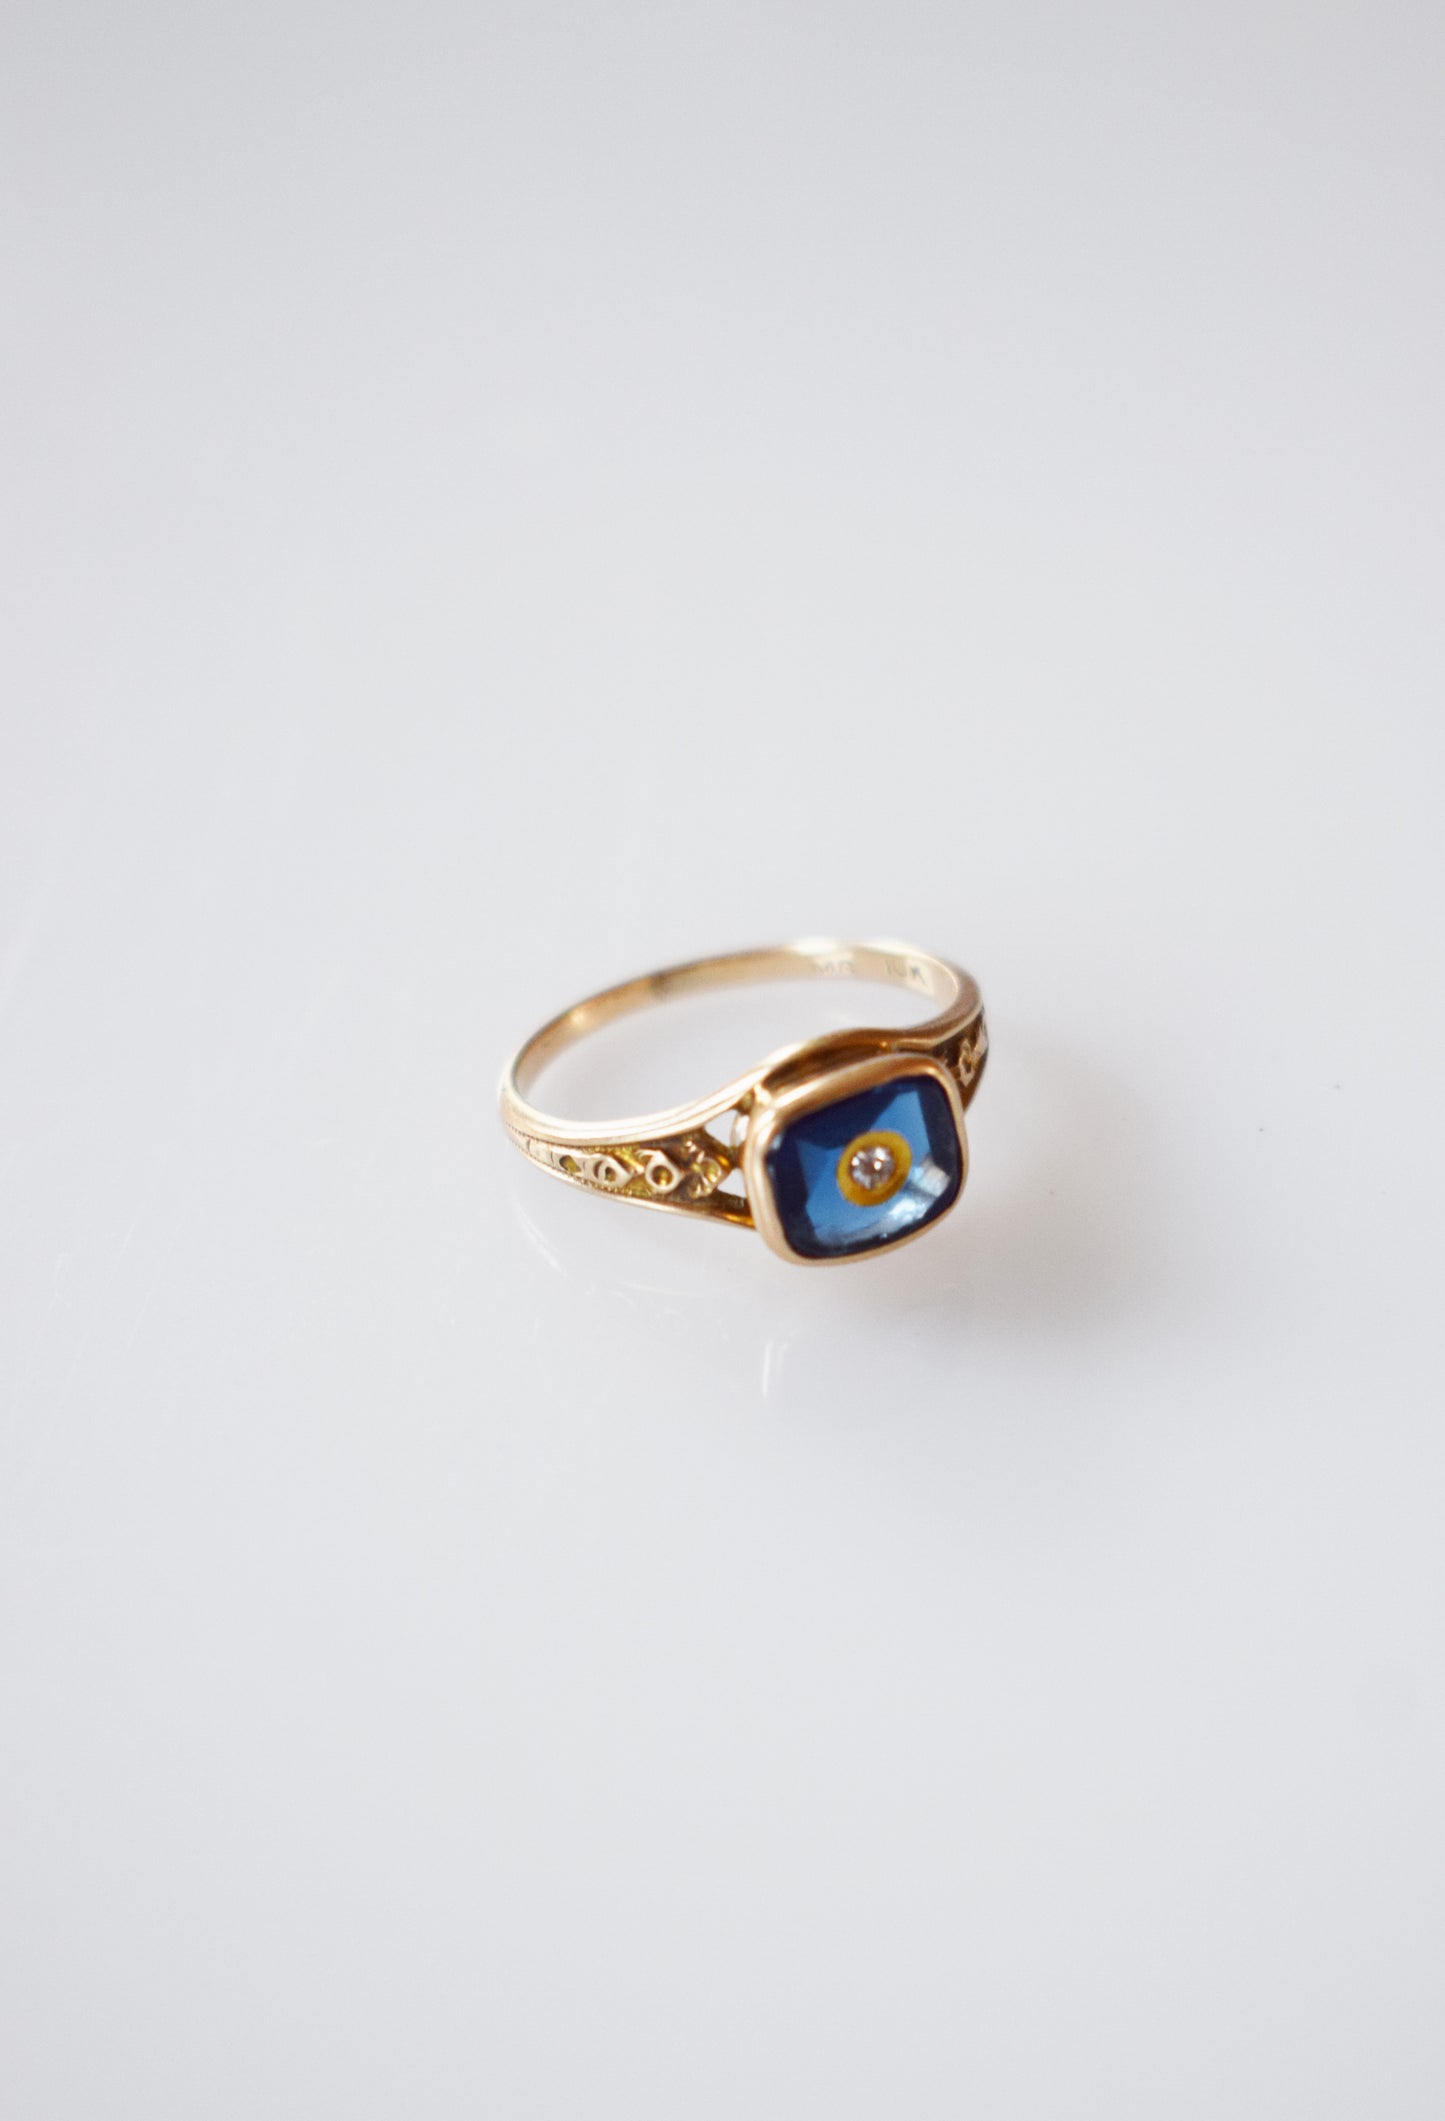 Antique Art Deco 10kt Gold, Diamond and Sapphire Stone Ring | 4.5